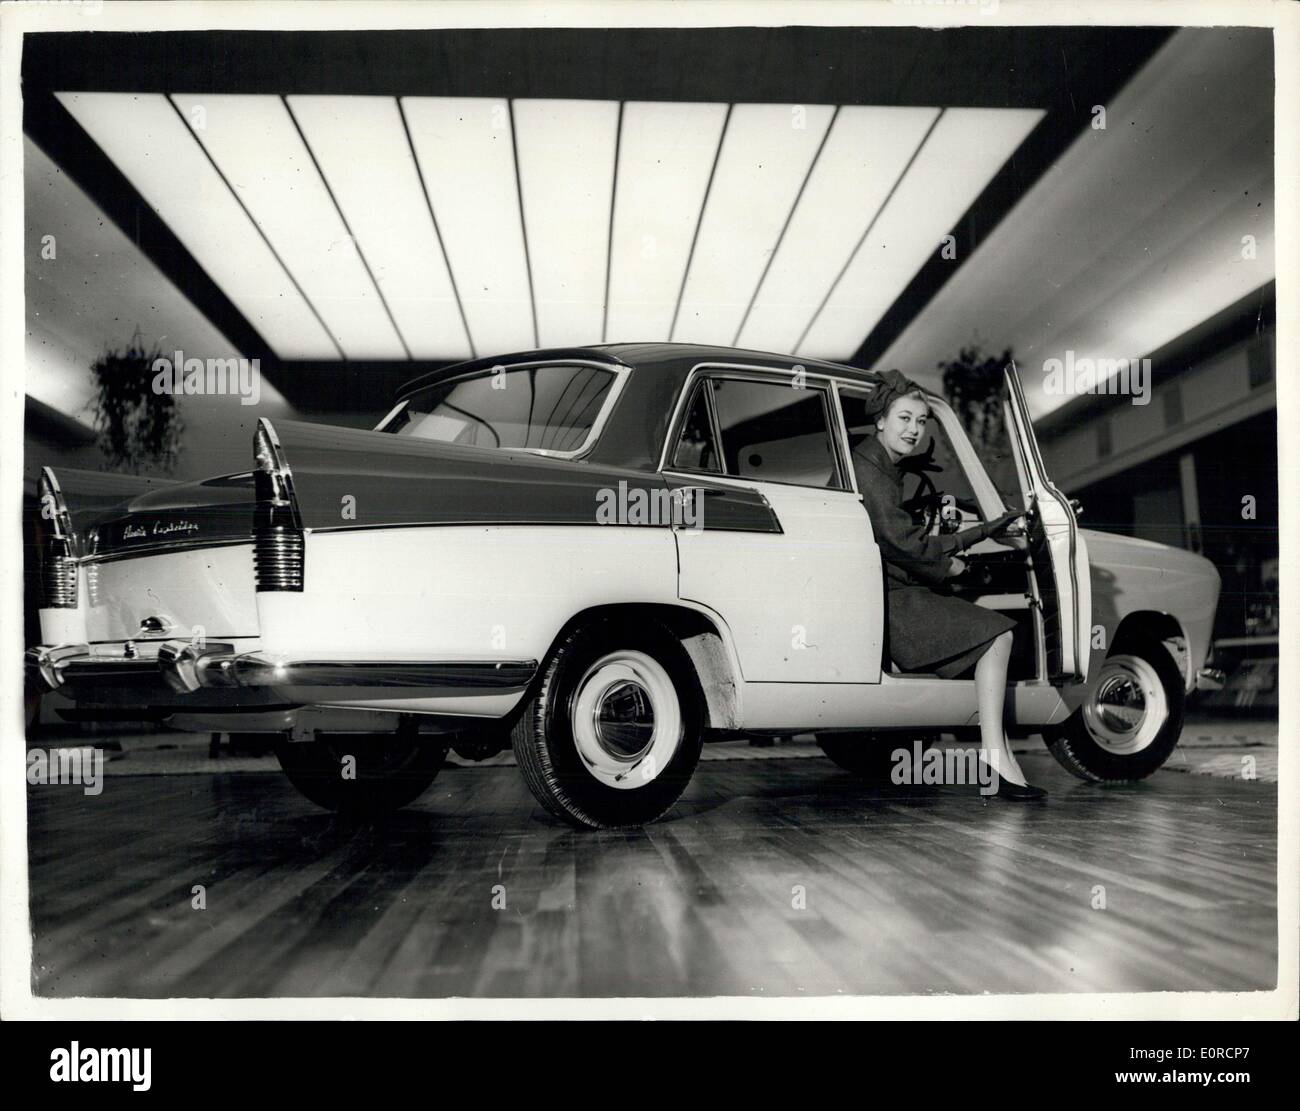 Jan. 16, 1959 - The new re-styled Italian-designed Austin A.55 ? The new Austin A55 Cambridge MK 11 is a radically new family car with the new swift line. Plain for all to see is the hand of Pinin Farina in the styling. Shape apart, every line makes practical sense for there?s more elbowroom in the body, and a lot more room in the boot. Front, back and side there?s an unobstructed view with 22 square feet of glass, a greatly improved all-round visibility. This new car does just under 80 mph effortlessly and the petrol consumption works out just over 30 miles to the gallon Stock Photo